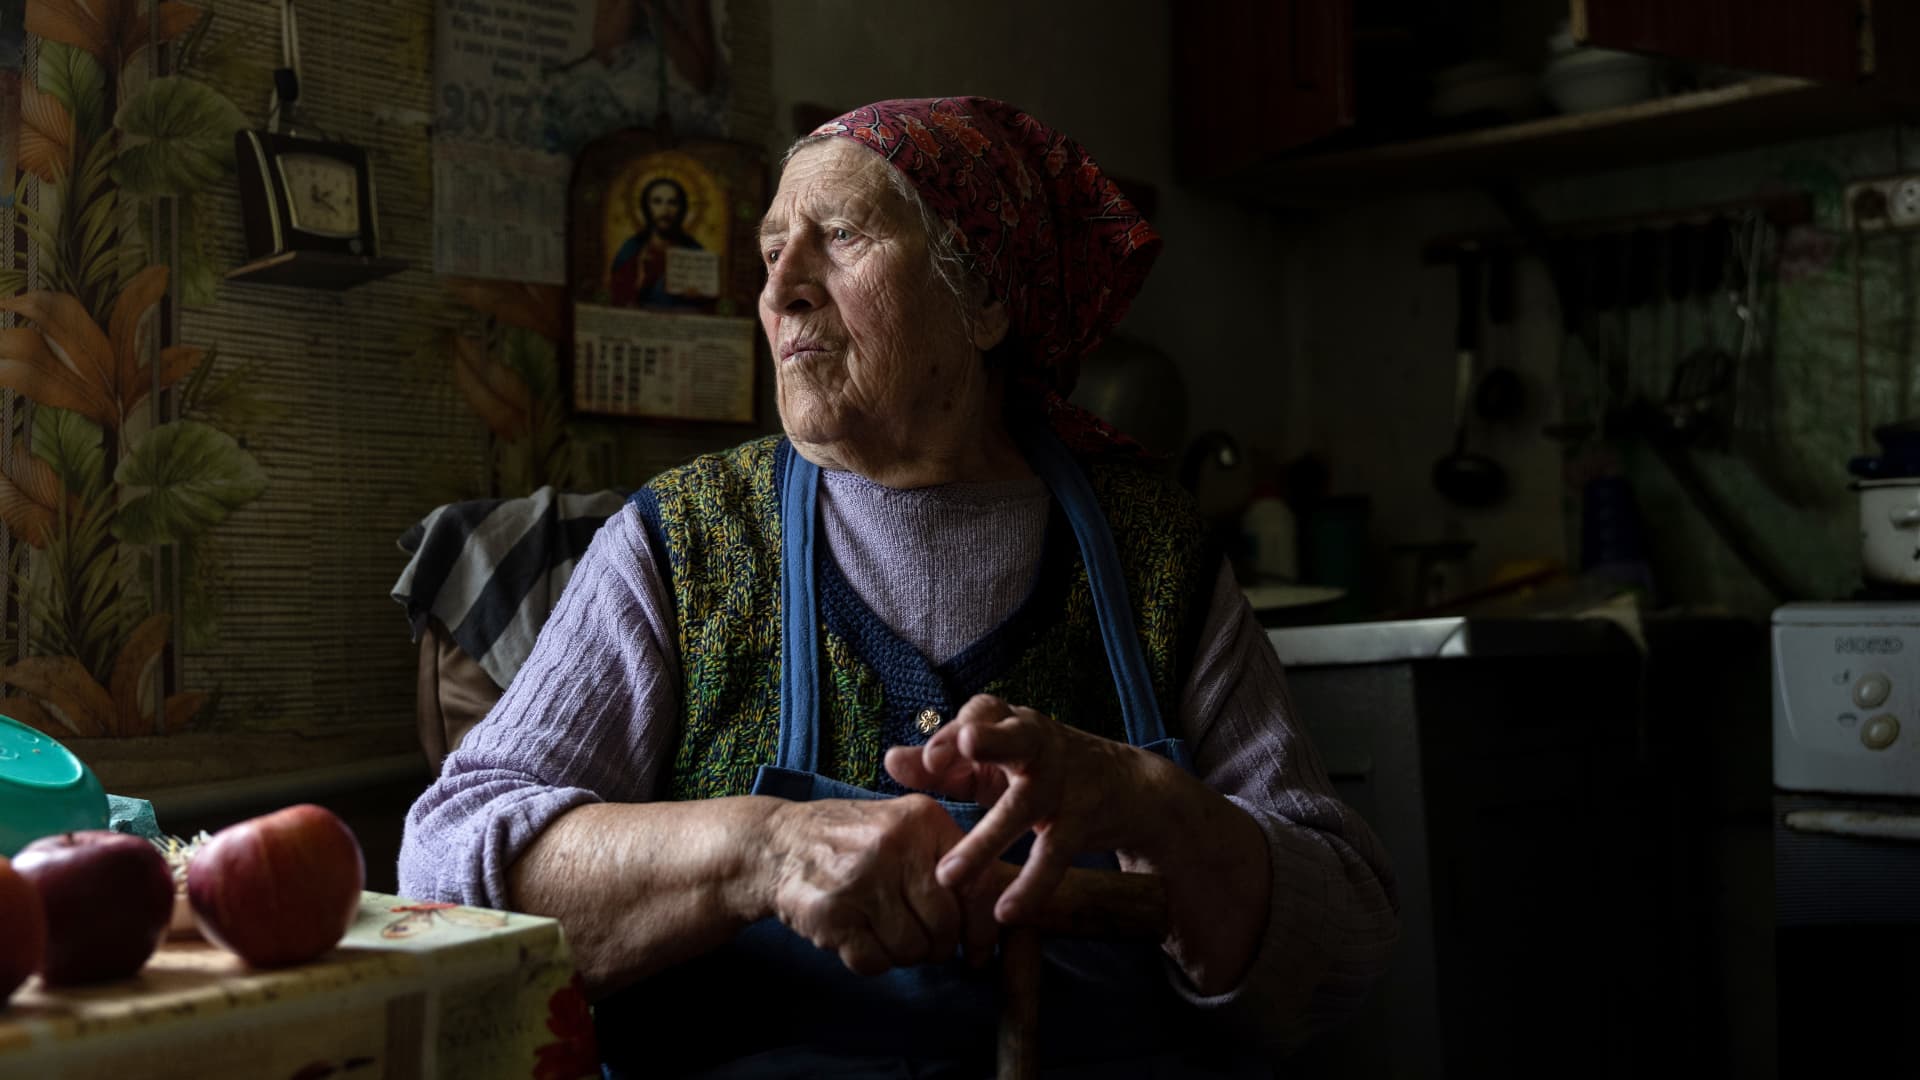 Maria Pshenychnykh, 83, sits in the kitchen of her war-damaged home near Kharkiv on May 18, 2022 in Vilkhivka, Ukraine, which had until recently been occupied by Russian forces. Seniors in the city have been relying on humanitarian aid, as their monthly government pension payments were suspended due to the fighting. In recent weeks Ukrainian forces have advanced towards the Russian border after Russia's offensive on Kharkiv, Ukraine's second largest city stalled.